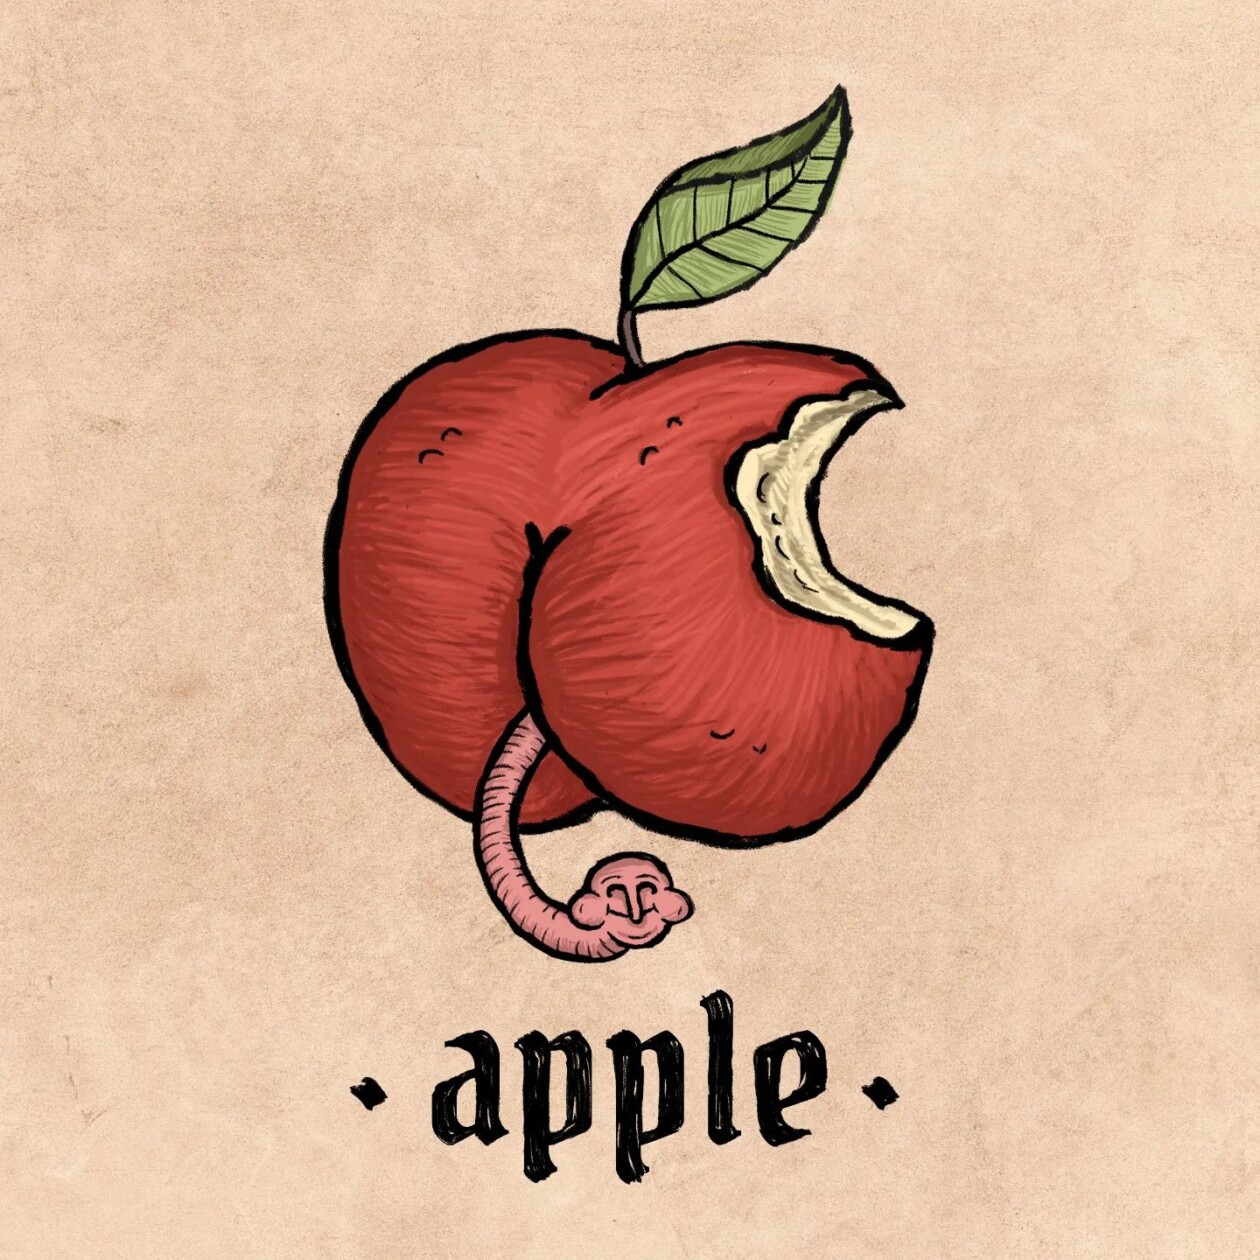 Modern Company Logos Recreated Like They Were Done During The Middle Ages By Ilya Stallone 16